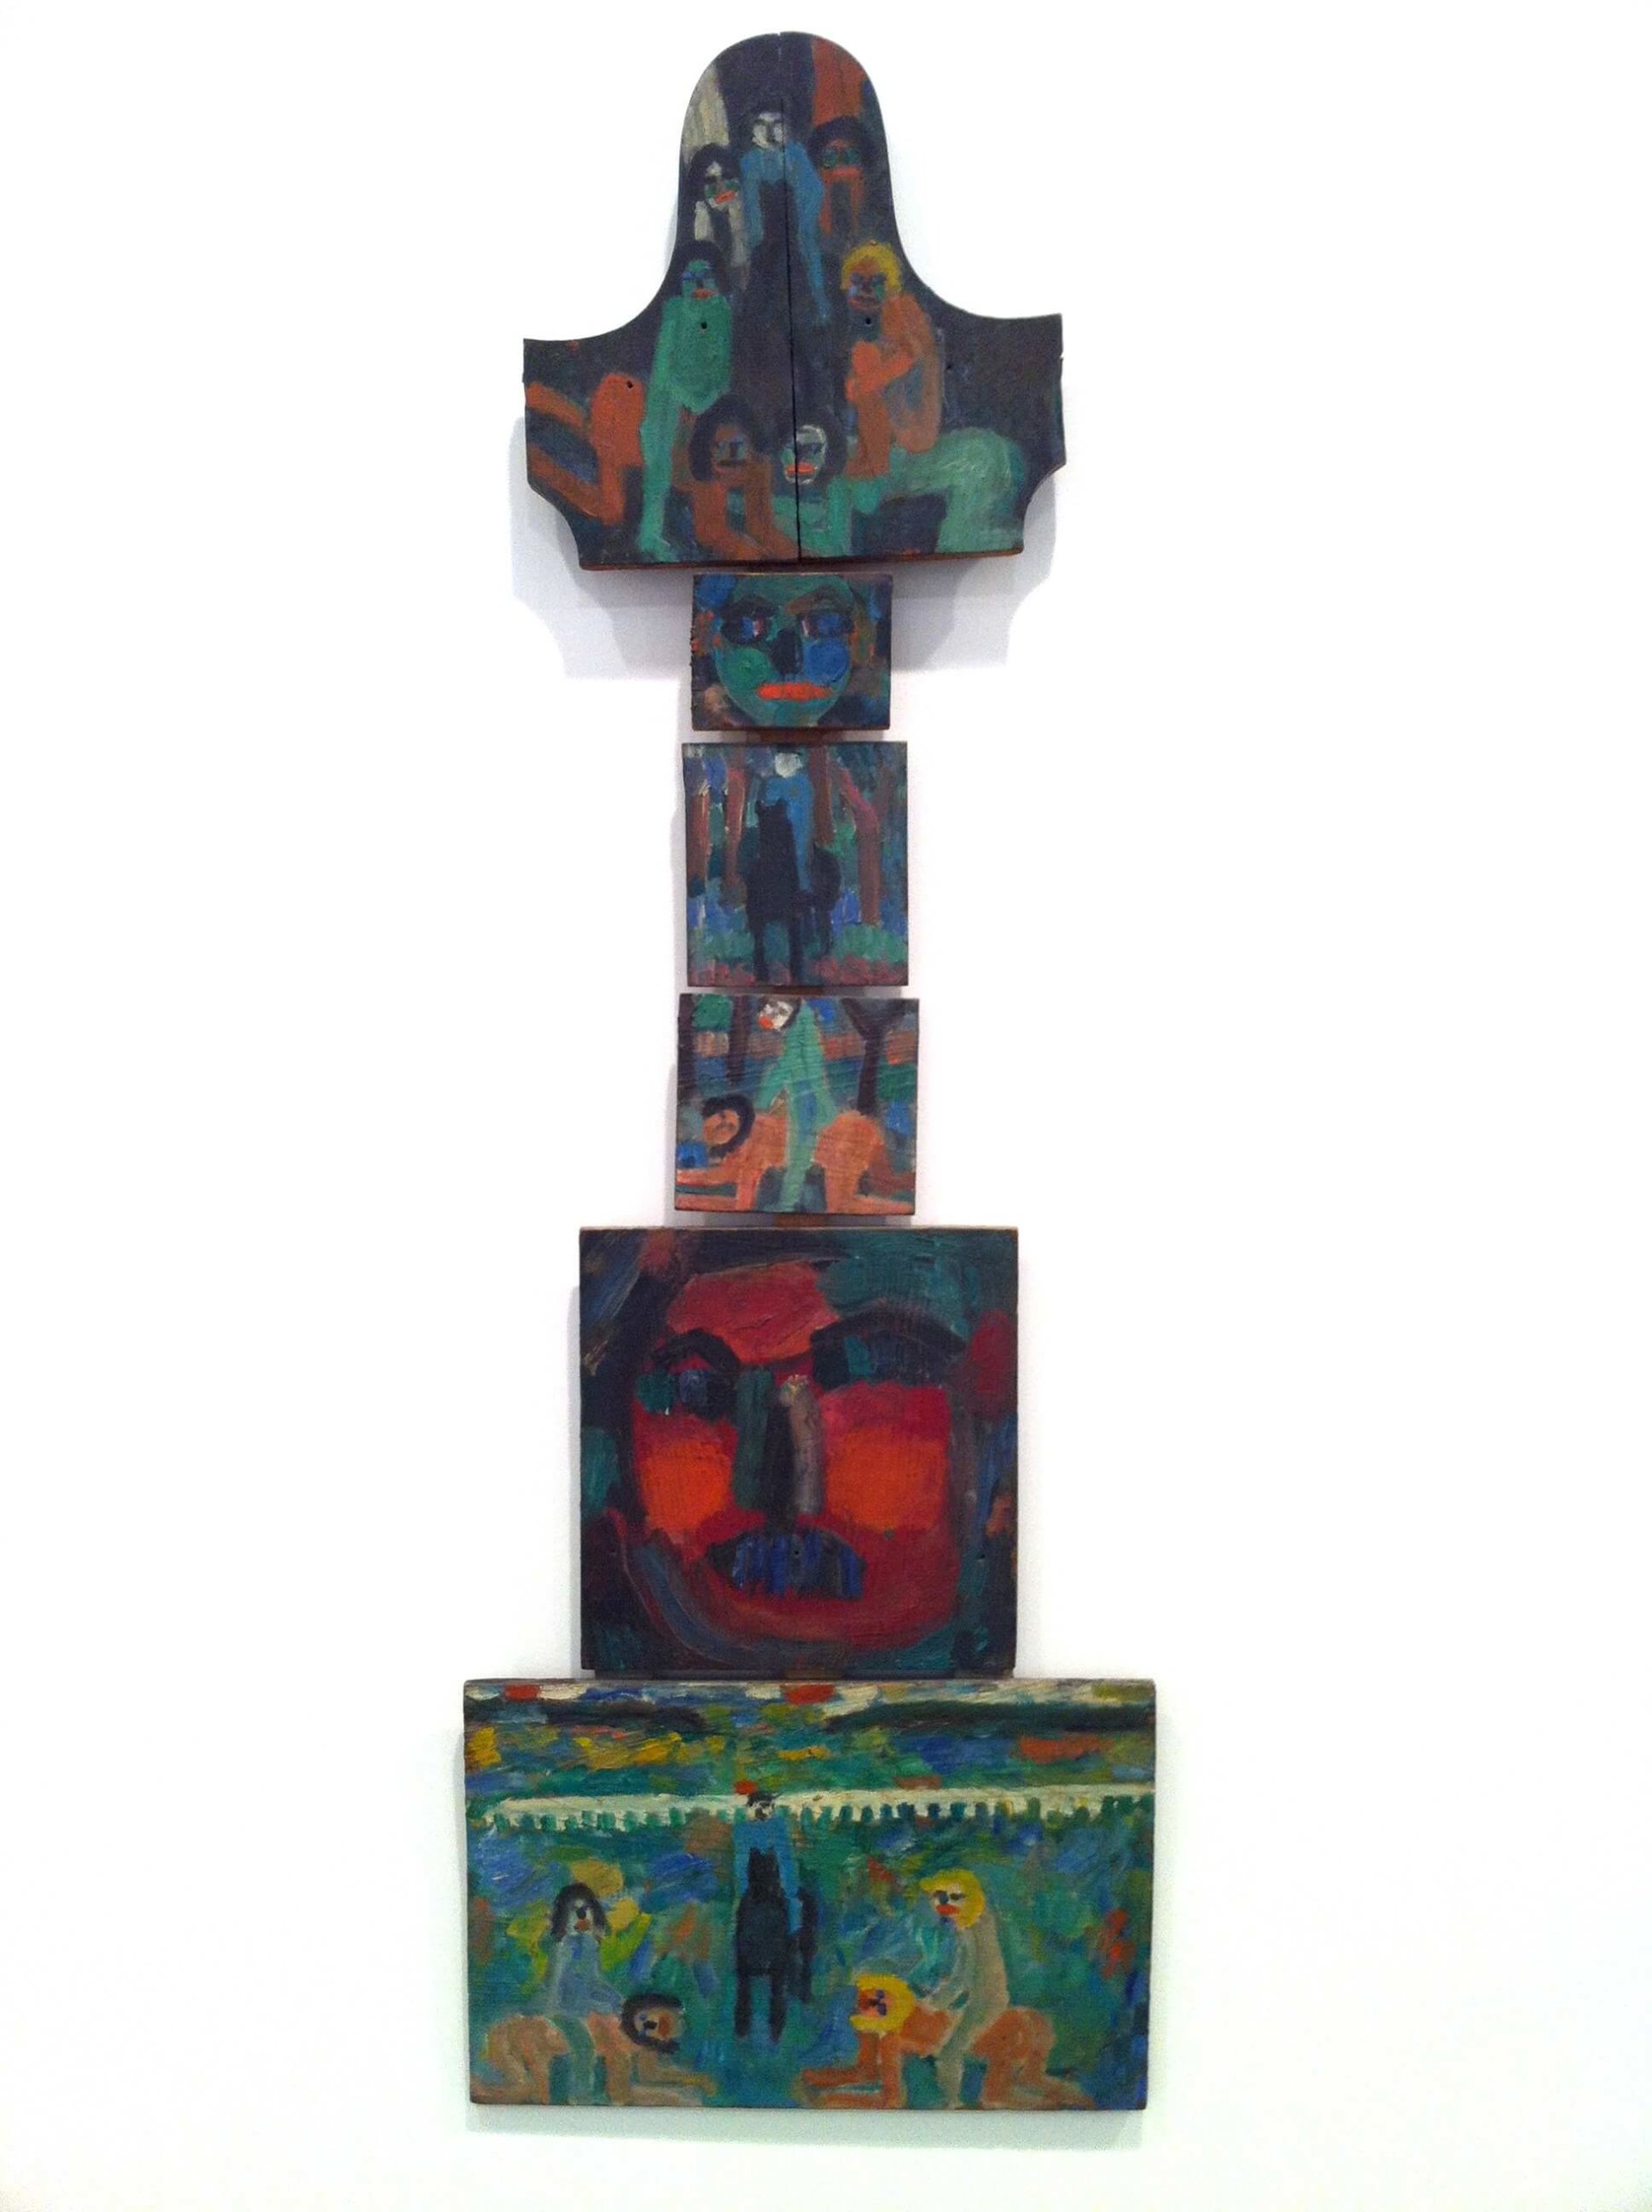 Jan Müller, Church Hanging Piece, c. 1957, oil on panel (in 6 parts) 50 x 16 3/4 inches (courtesy Lori Bookstein Fine Art)